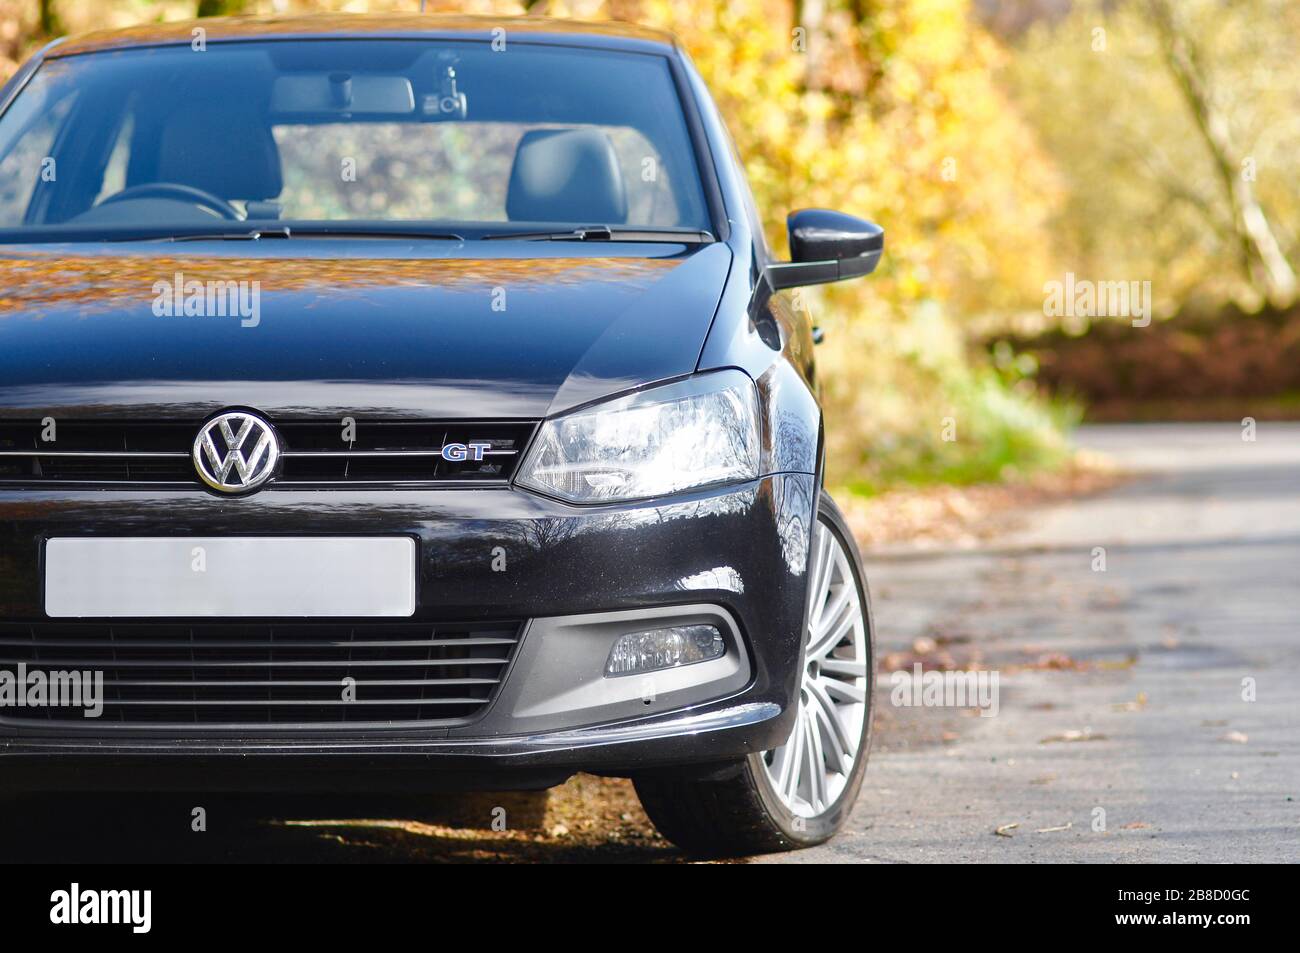 VW Volkswagen Polo 6C Blue GT black pearlescent Stock Photo - Alamy